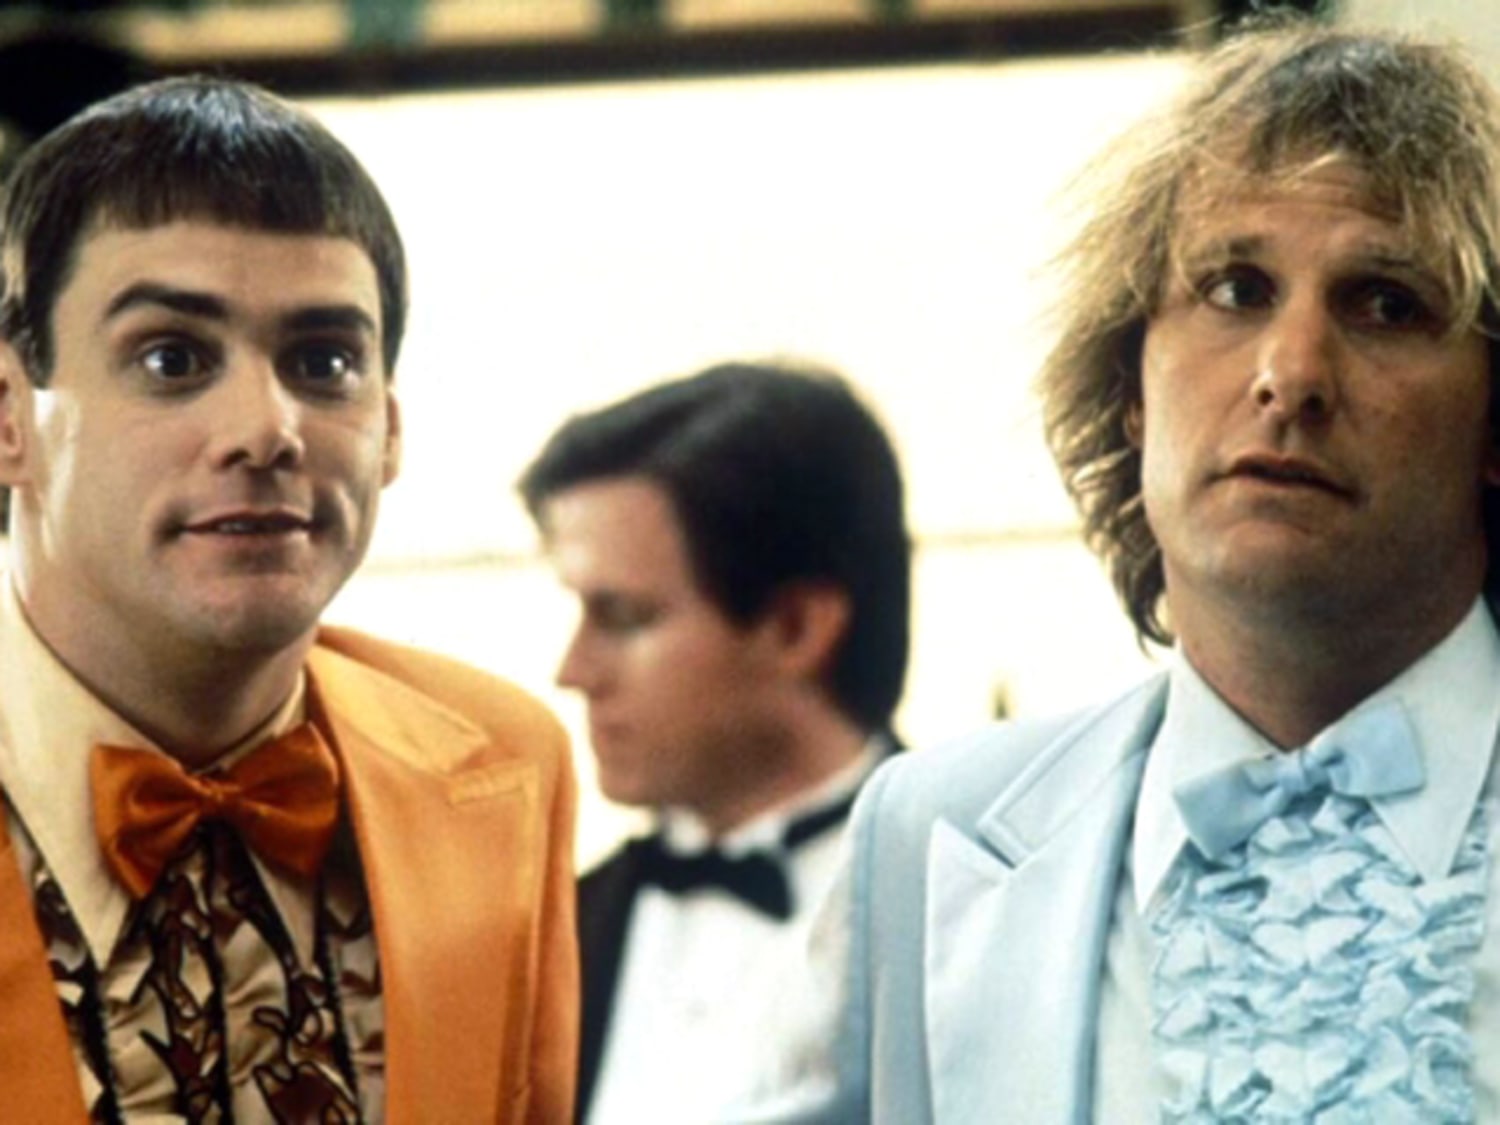 dumb and dumber full movie download free